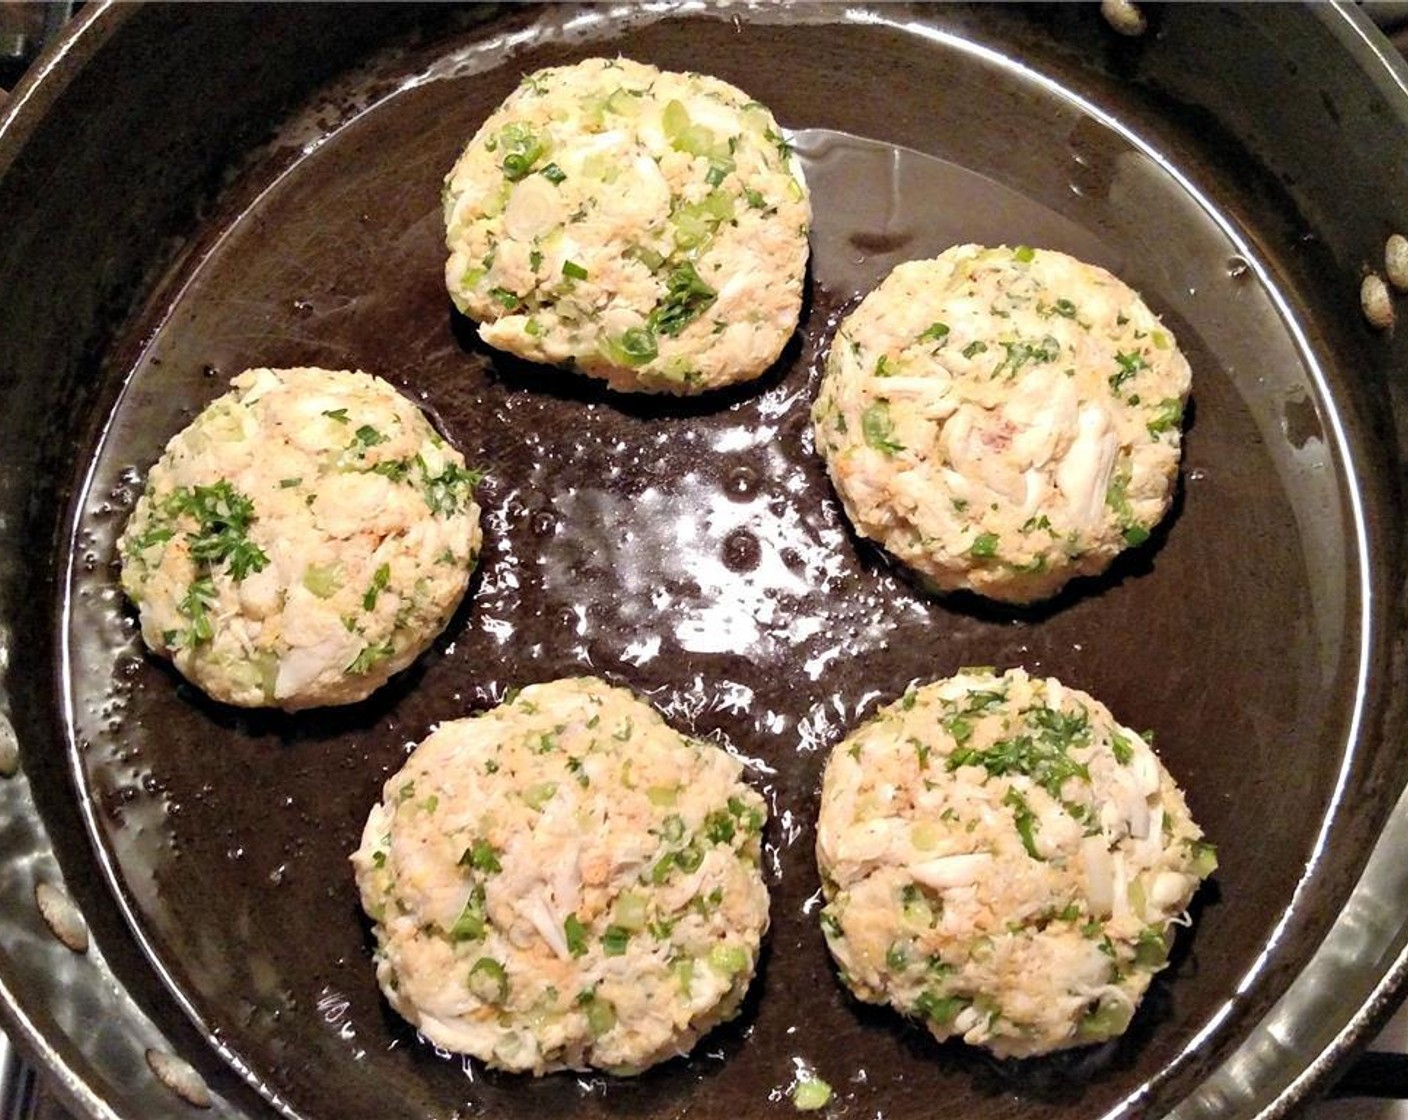 step 5 Preheat a large pan with Olive Oil (as needed). Saute your crab cakes for 3 minutes per side over medium-low heat, then drain on paper towels.